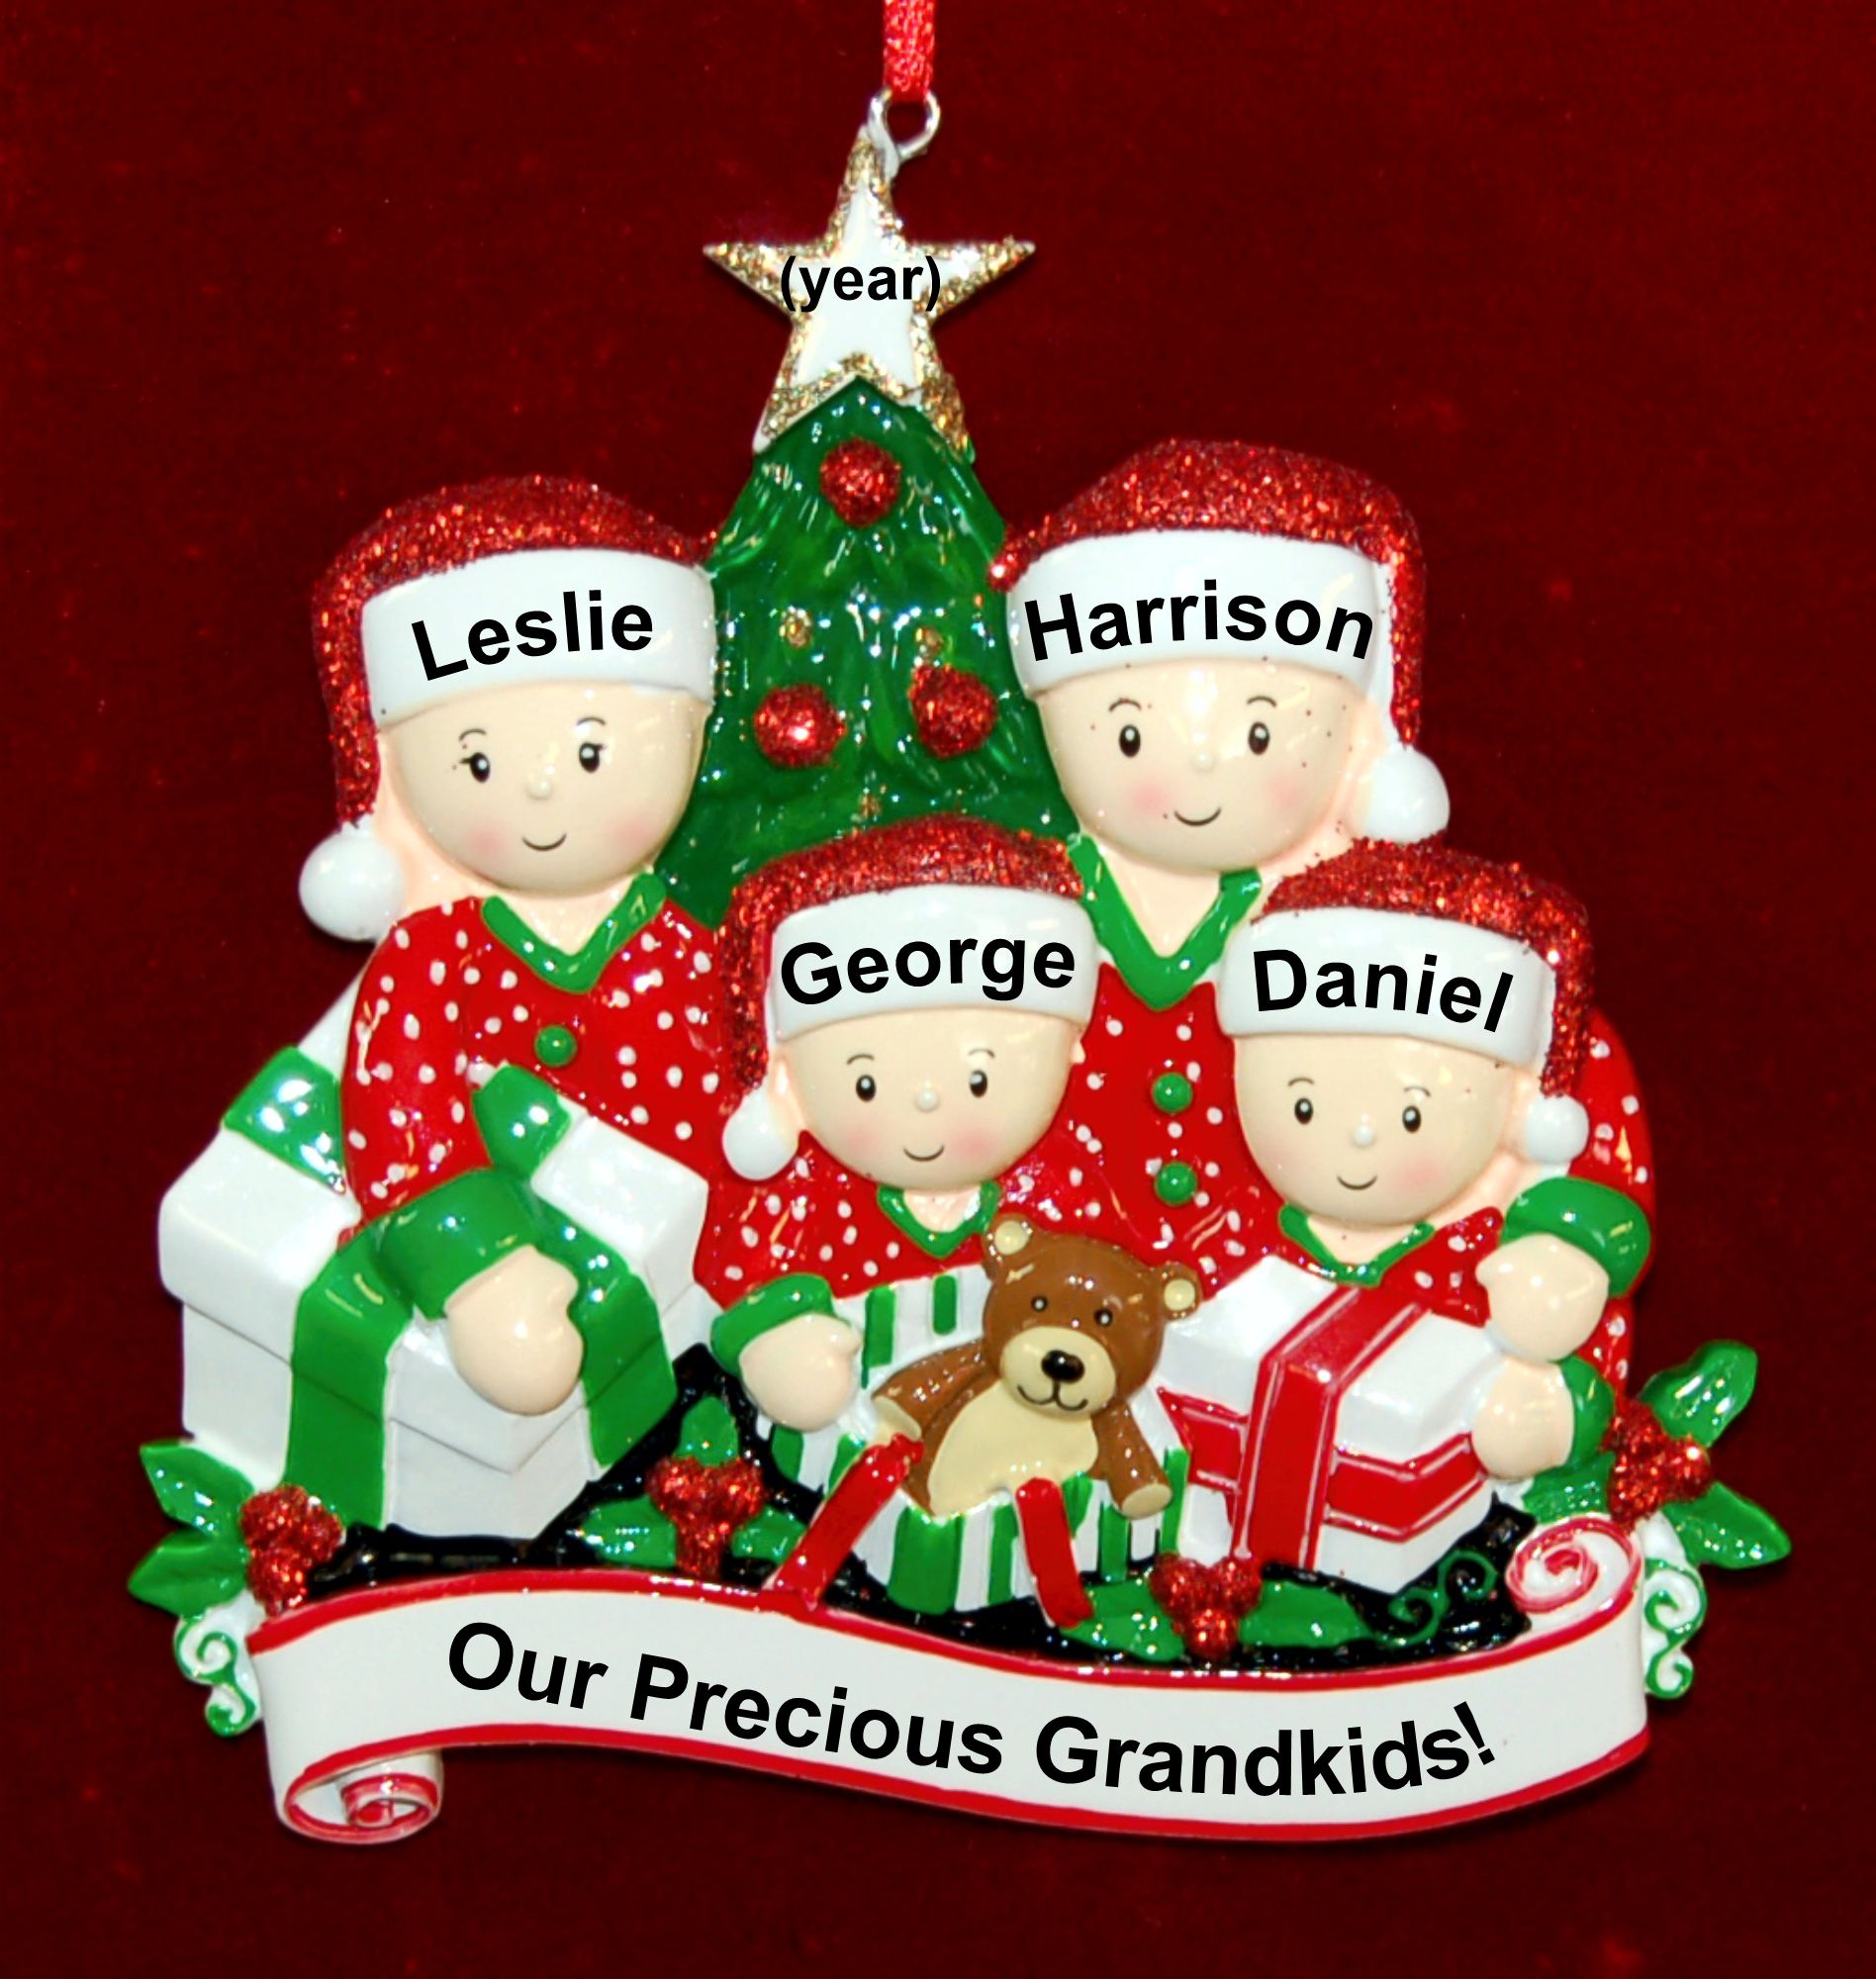 4 Grandkids Christmas Ornament Gifts Under the Tree Personalized by RussellRhodes.com